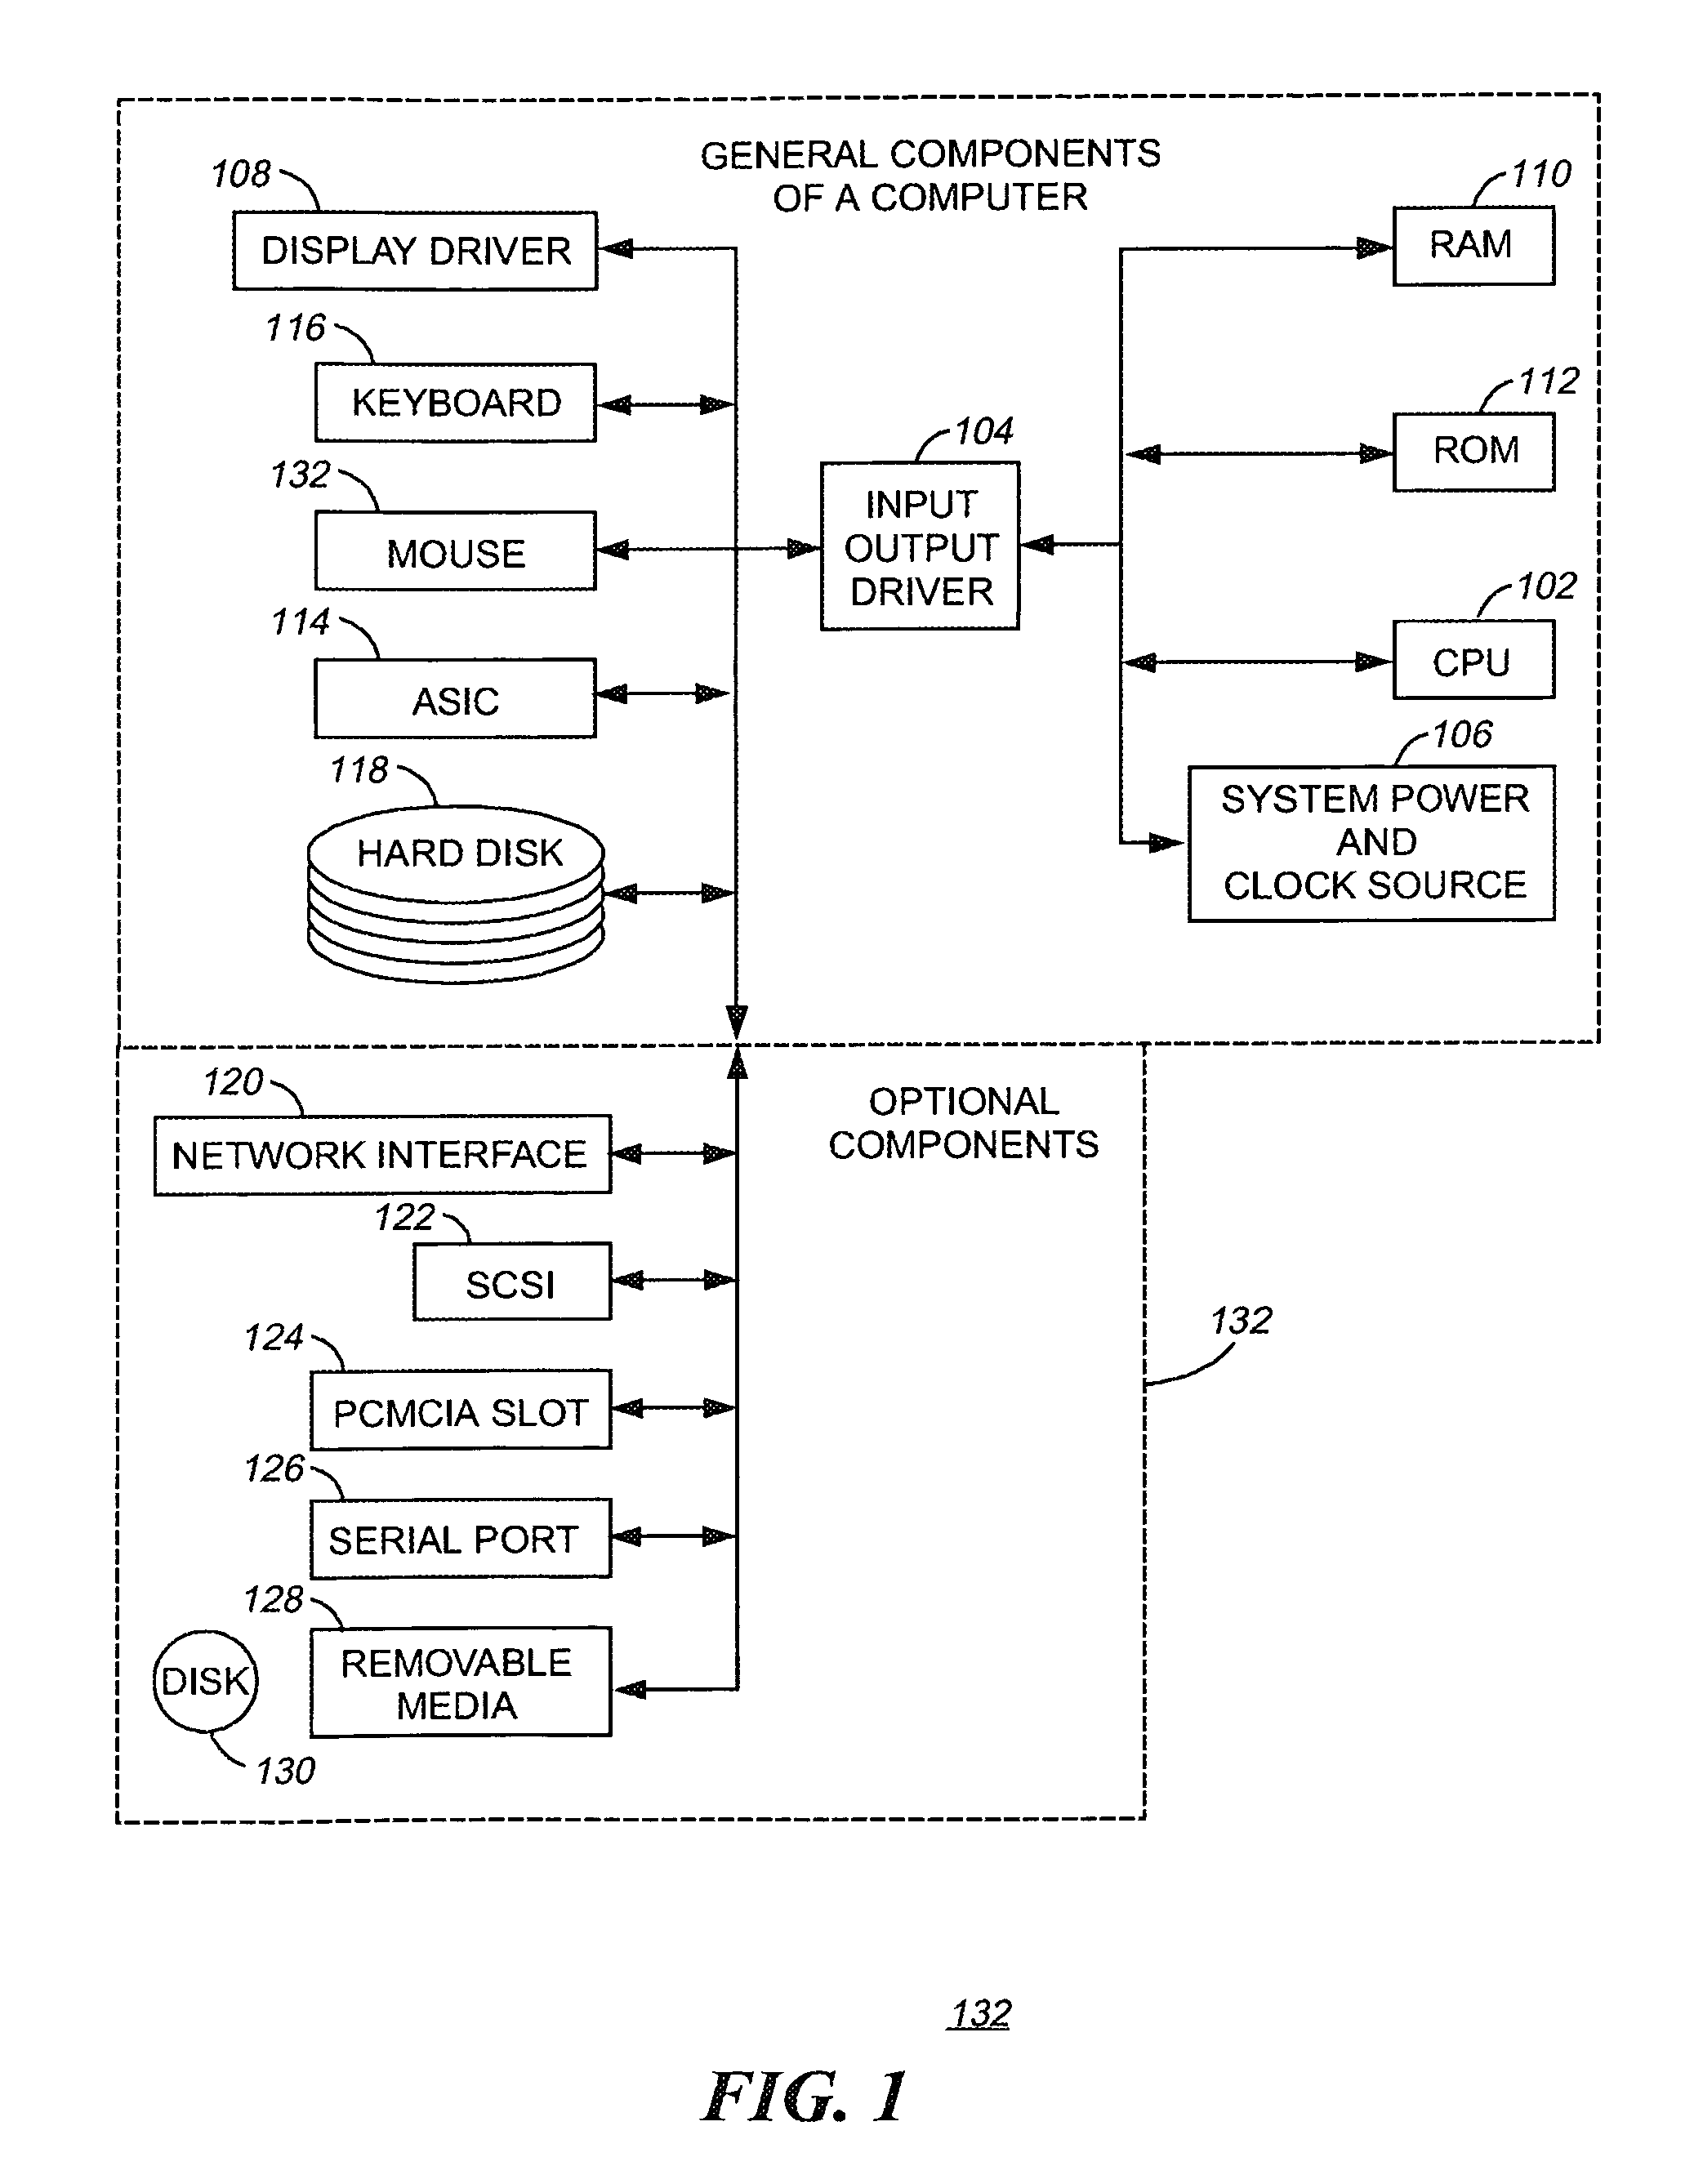 Method and system for objectively optimizing manufacturing sourcing